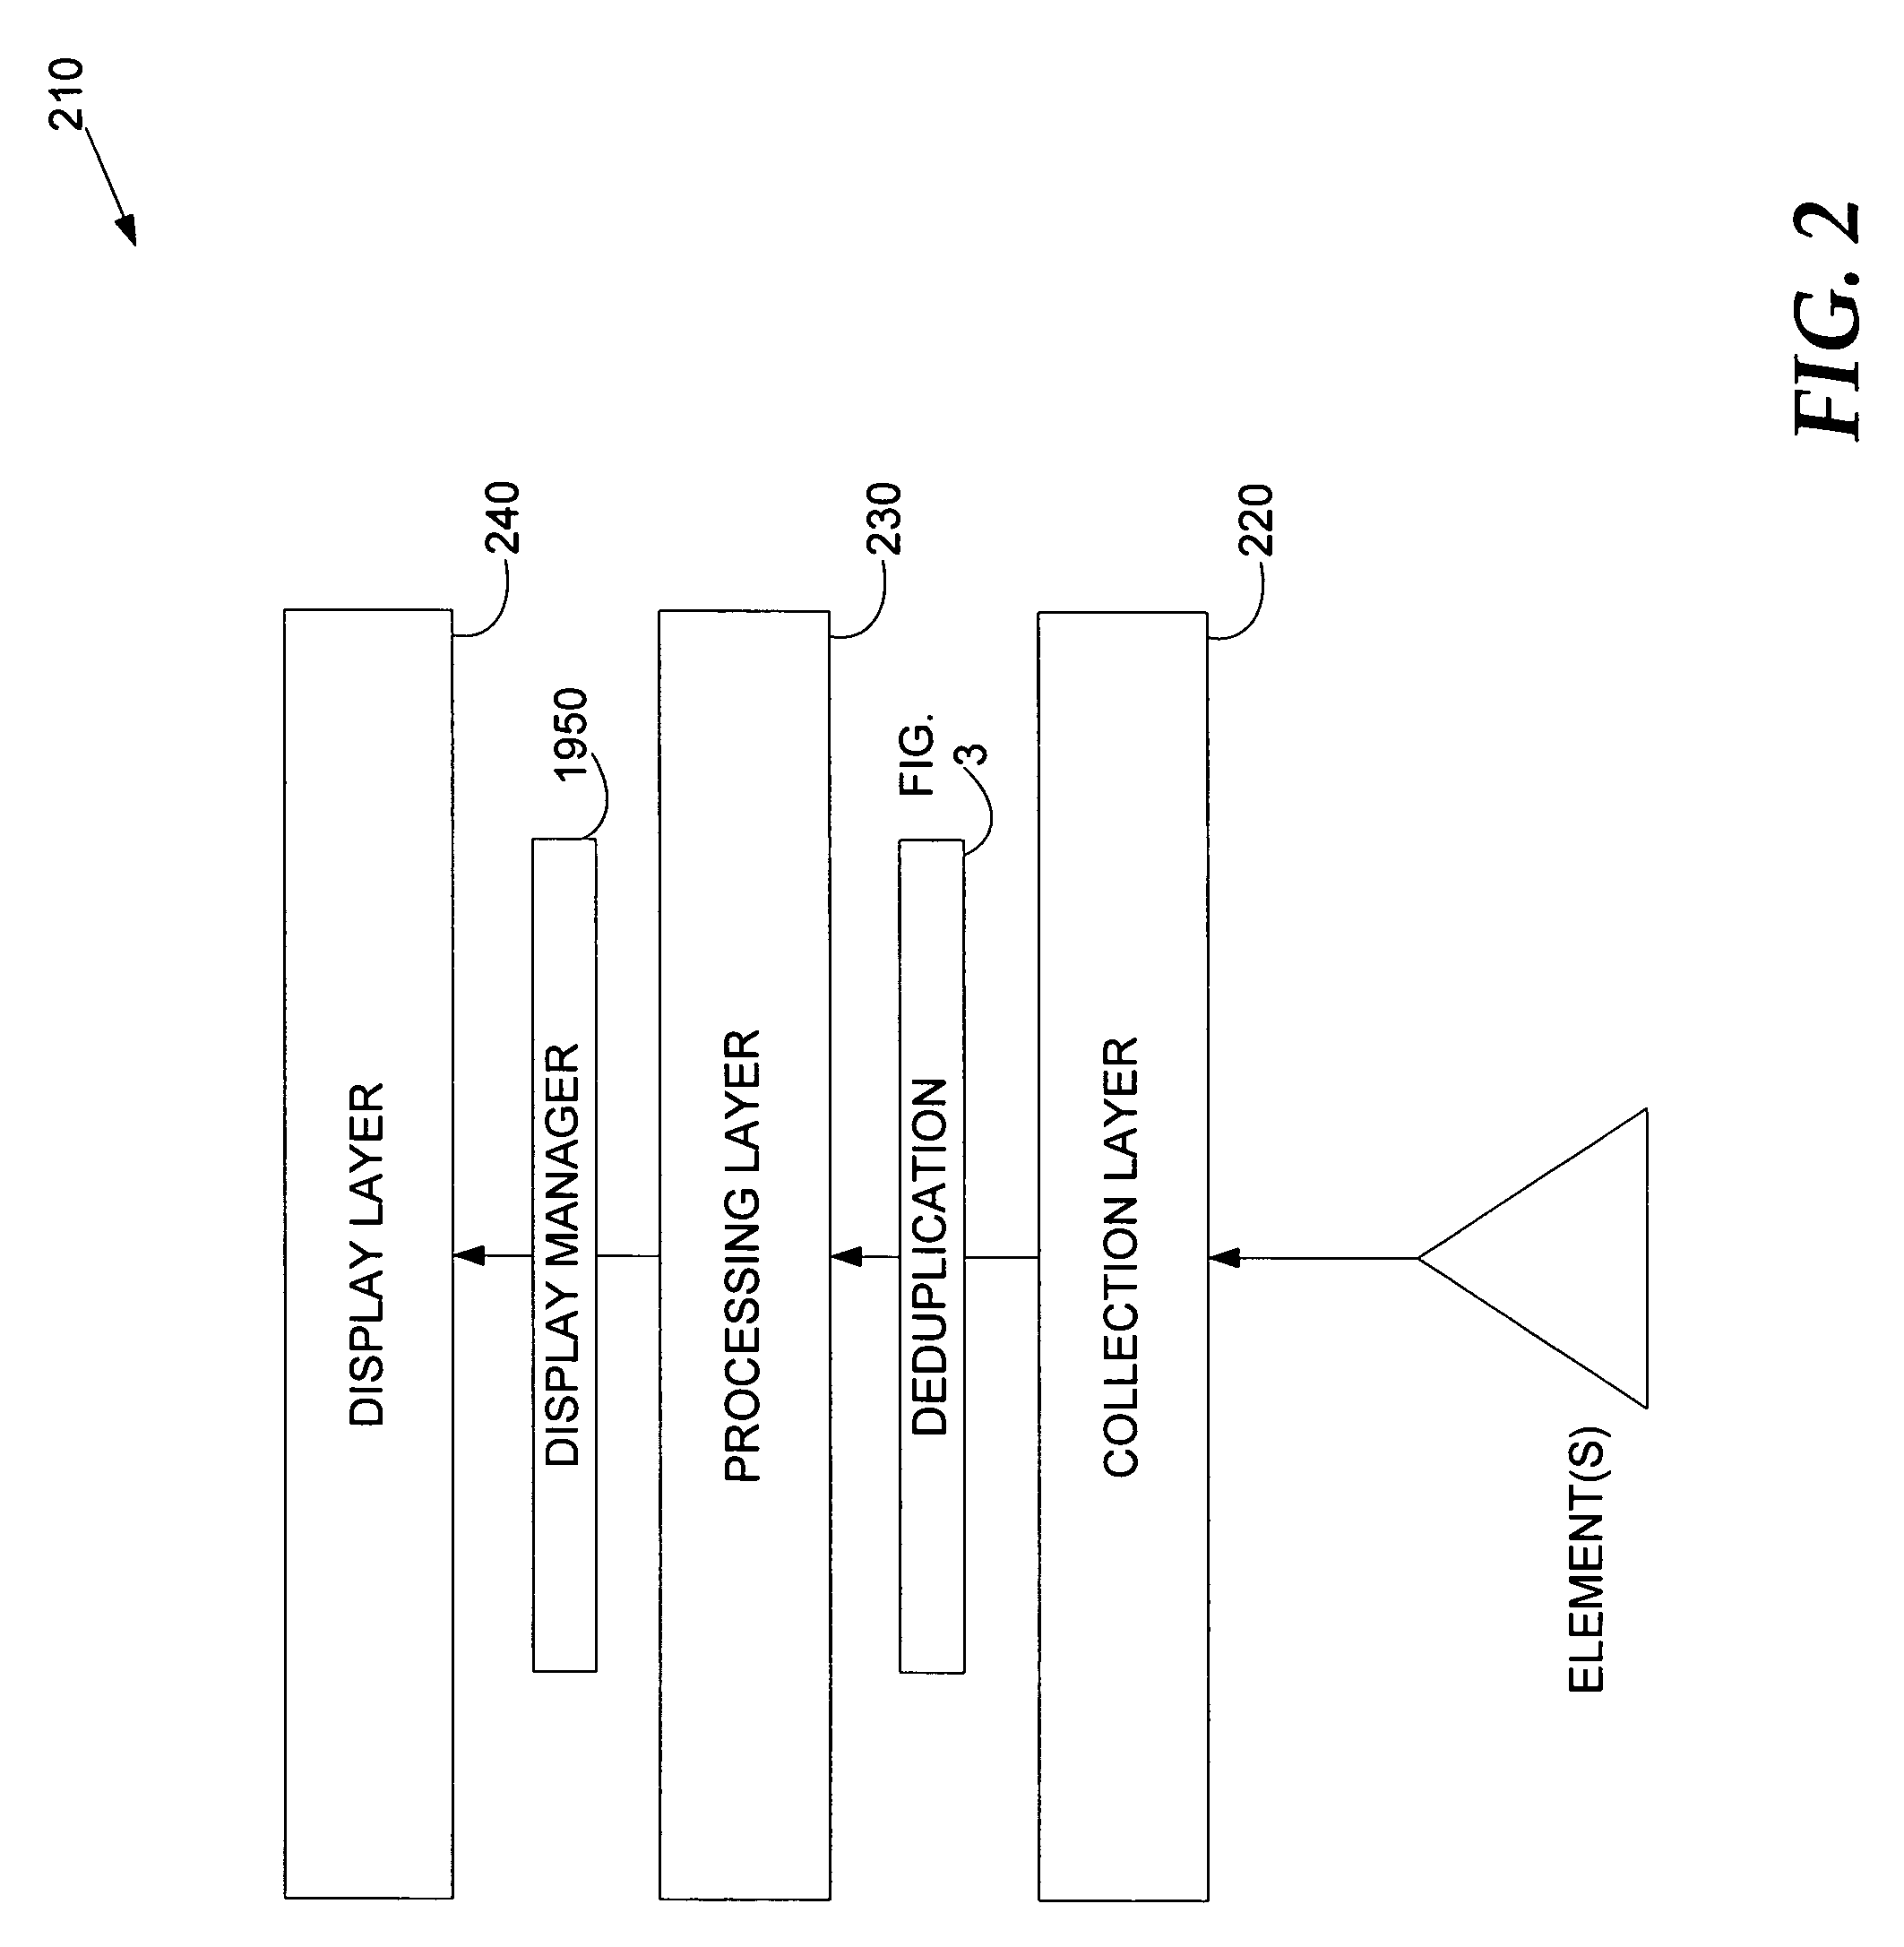 Method and system for deduplicating status indications in a communications network